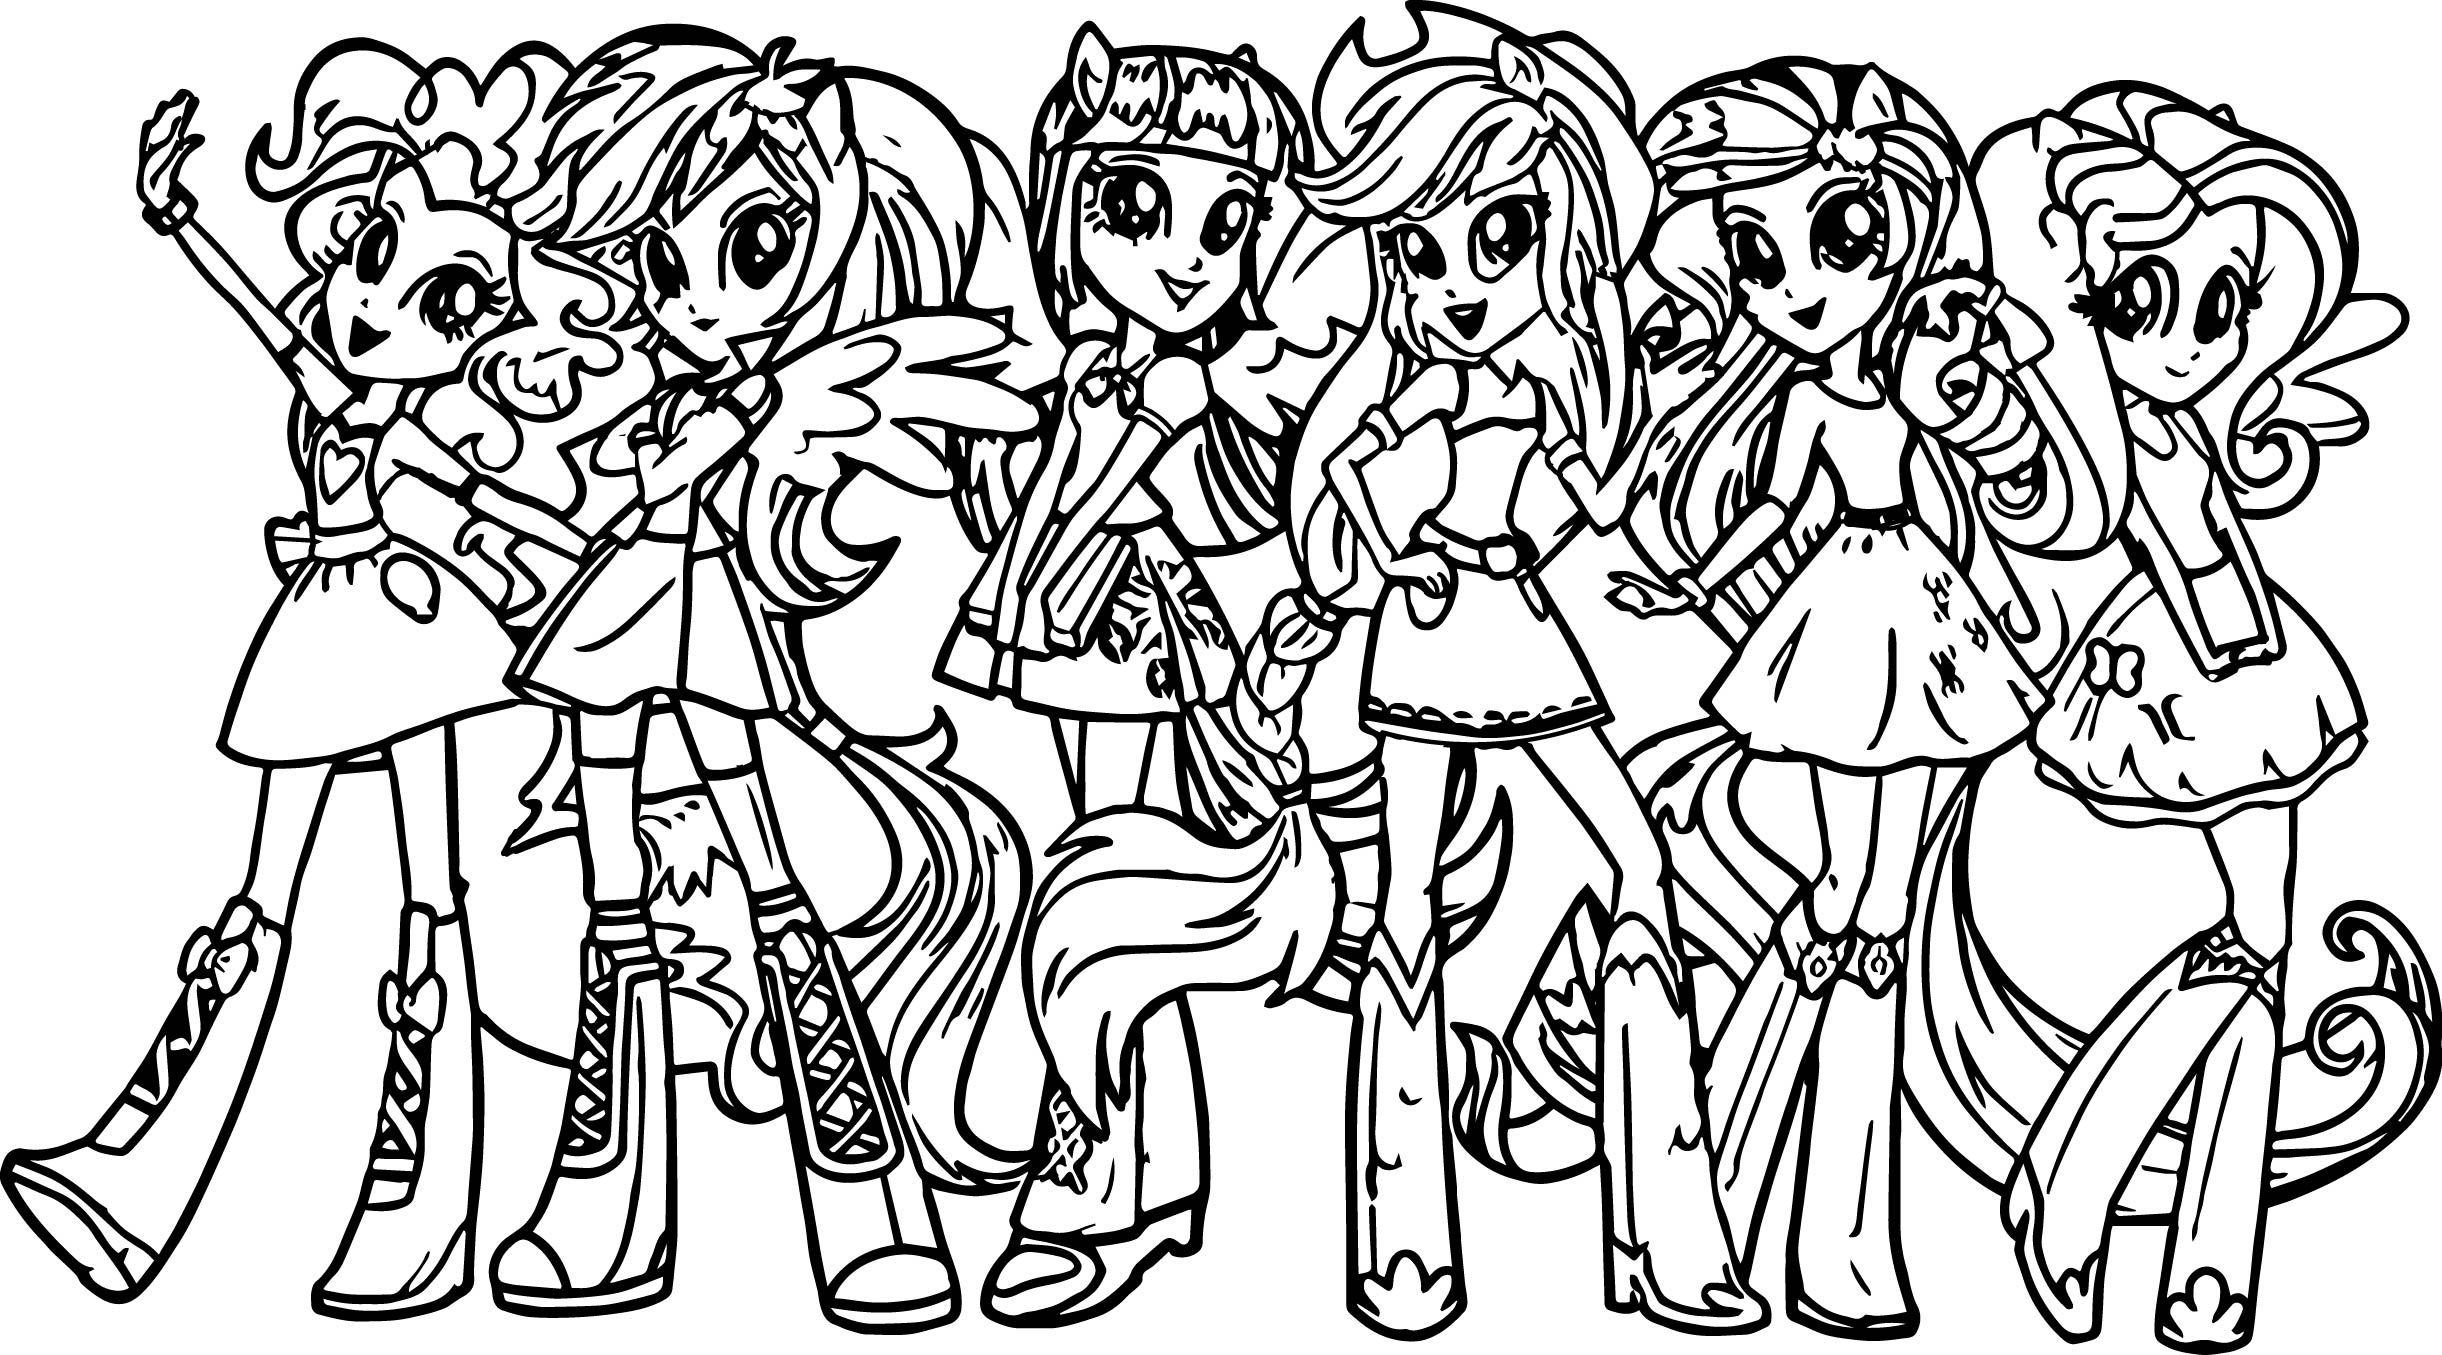 My Little Pony Girls Coloring Page   My Little Pony Coloring, My ...